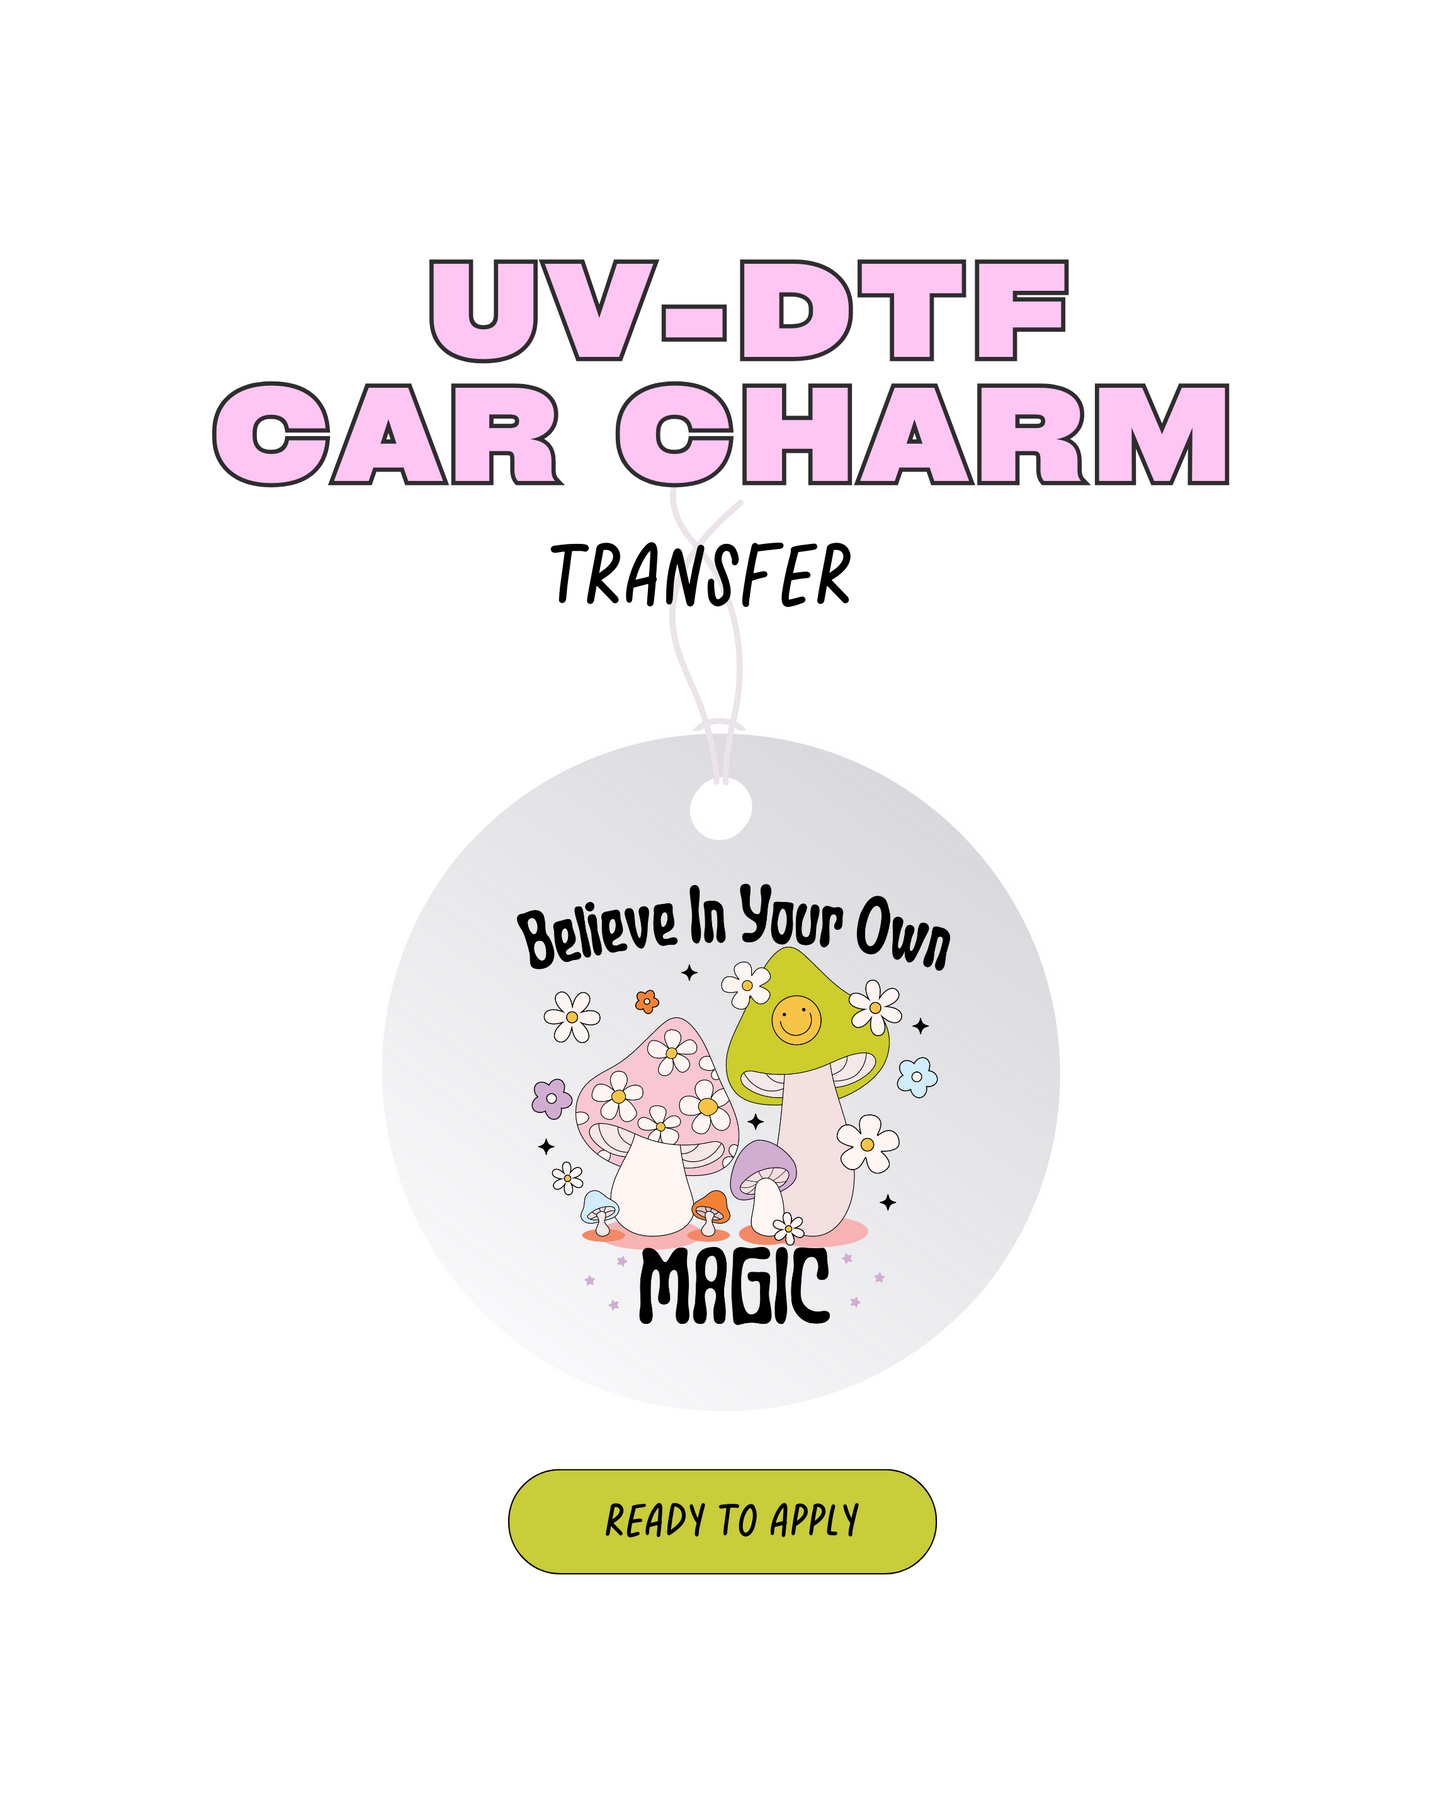 Belioved in your own magic - Car Charm Decal